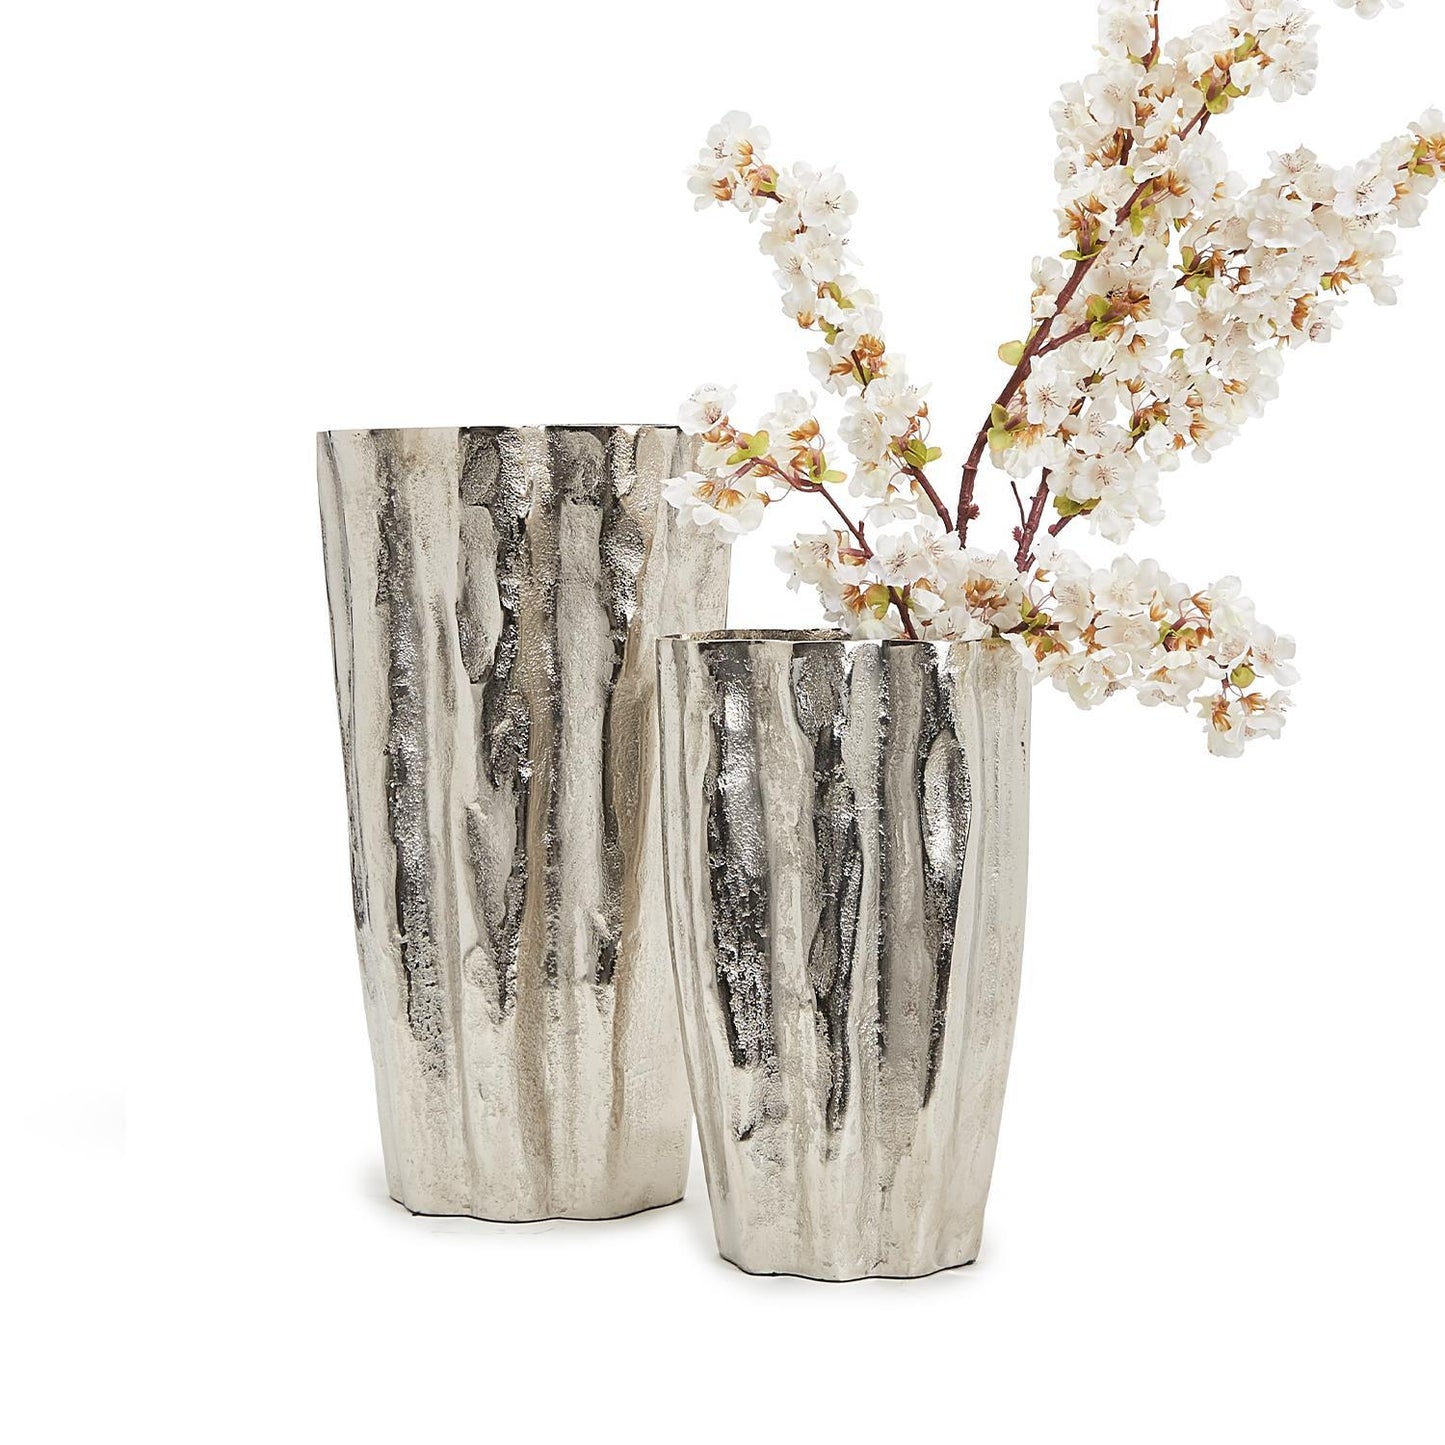 Two's Company Set Of 2 Silver Tree Vase (Dry Flowers Only)- Recycle Aluminum